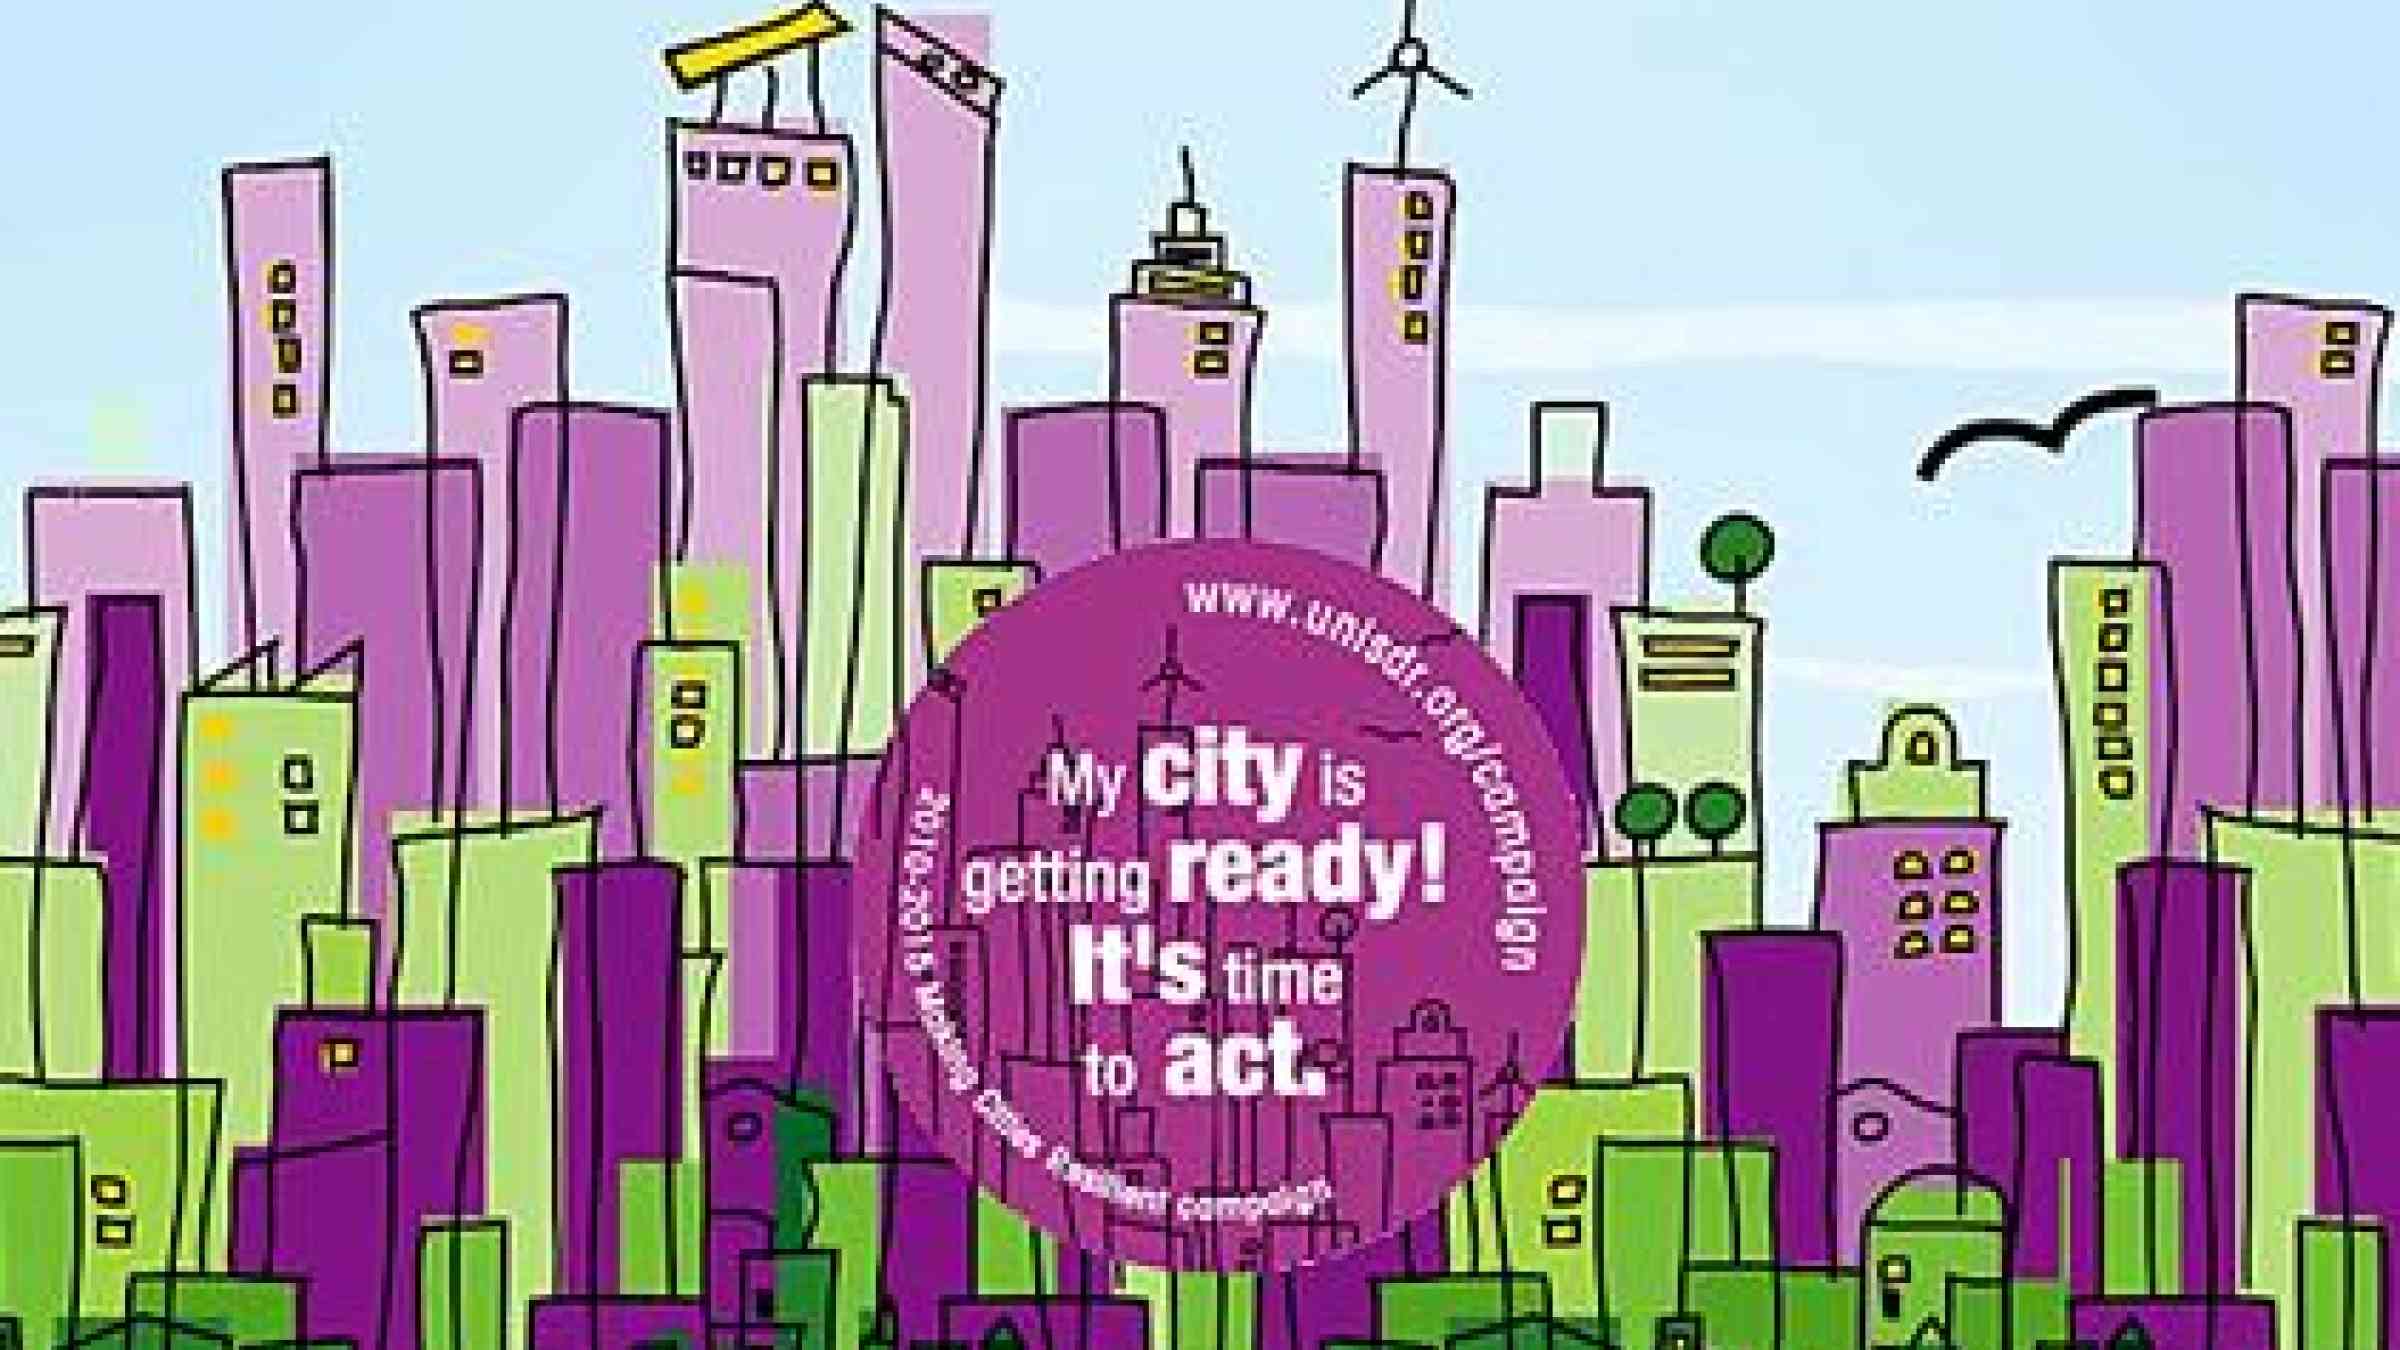 There are now 45 role model cities under UNISDR's Making Cities Resilient campaign that are ready to implement the new ISO 37120 standard for resilient and sustainable cities.